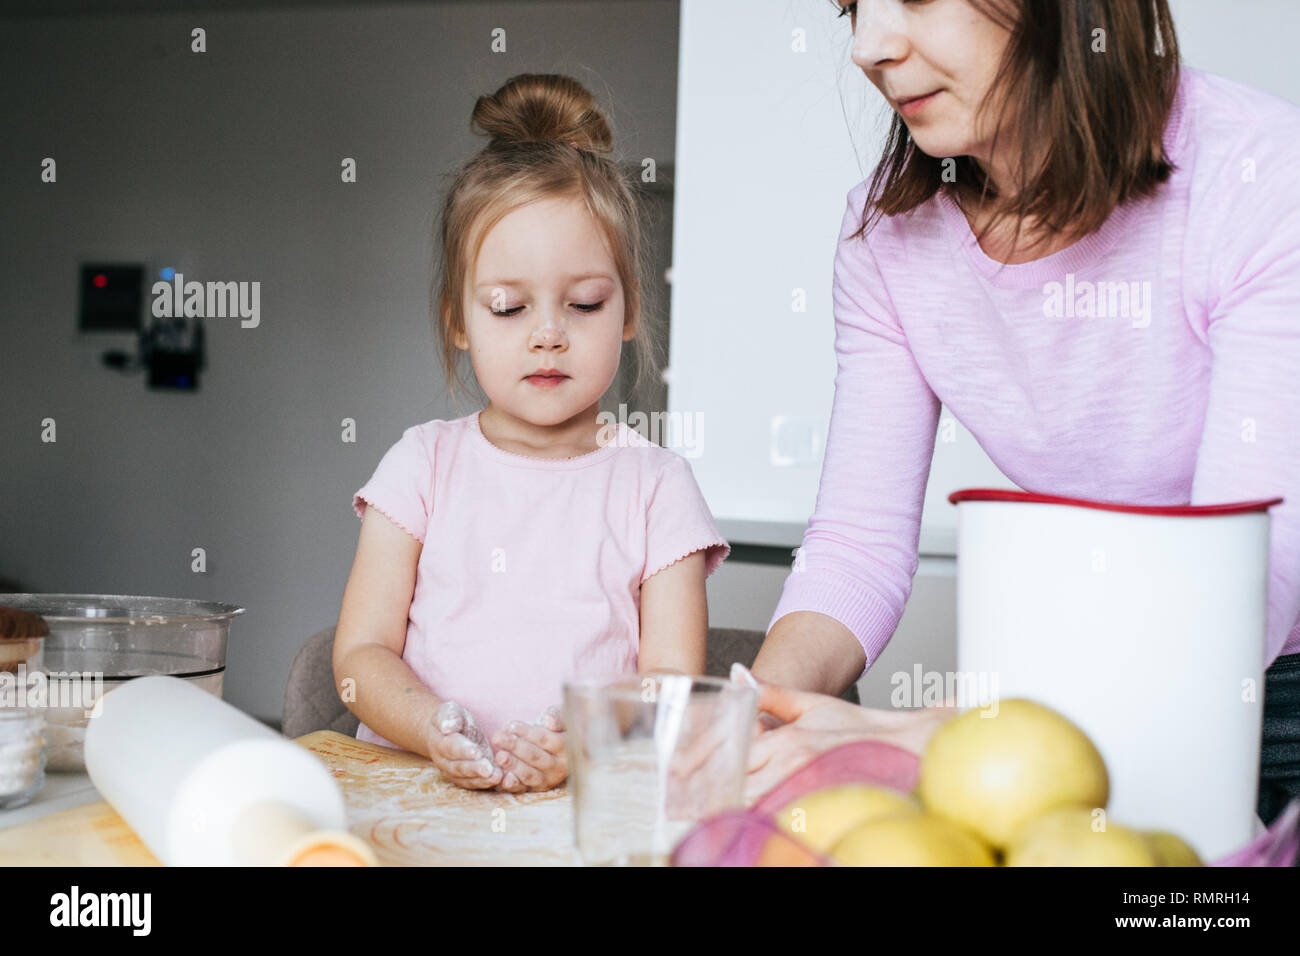 Mother teaching young daughter how to make cookies Stock Photo